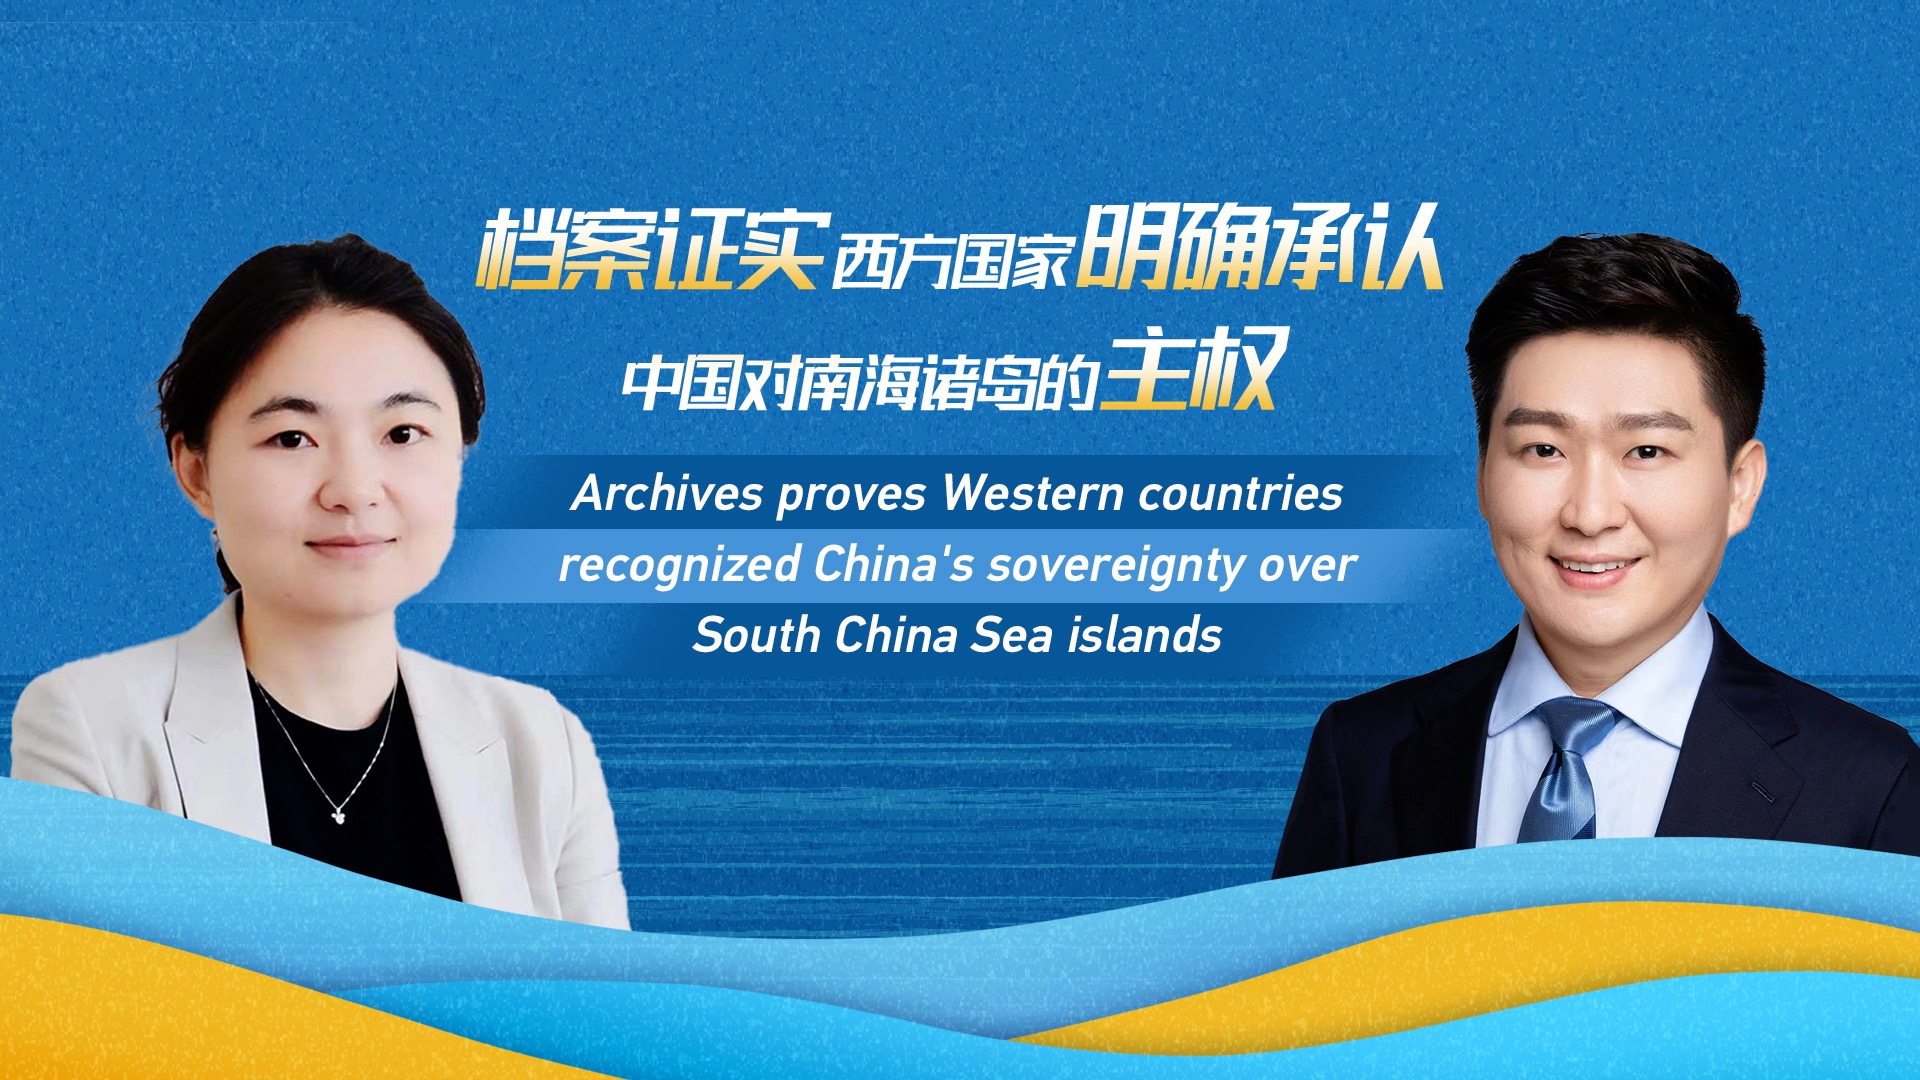 Archives prove West recognized China's South China Sea sovereignty